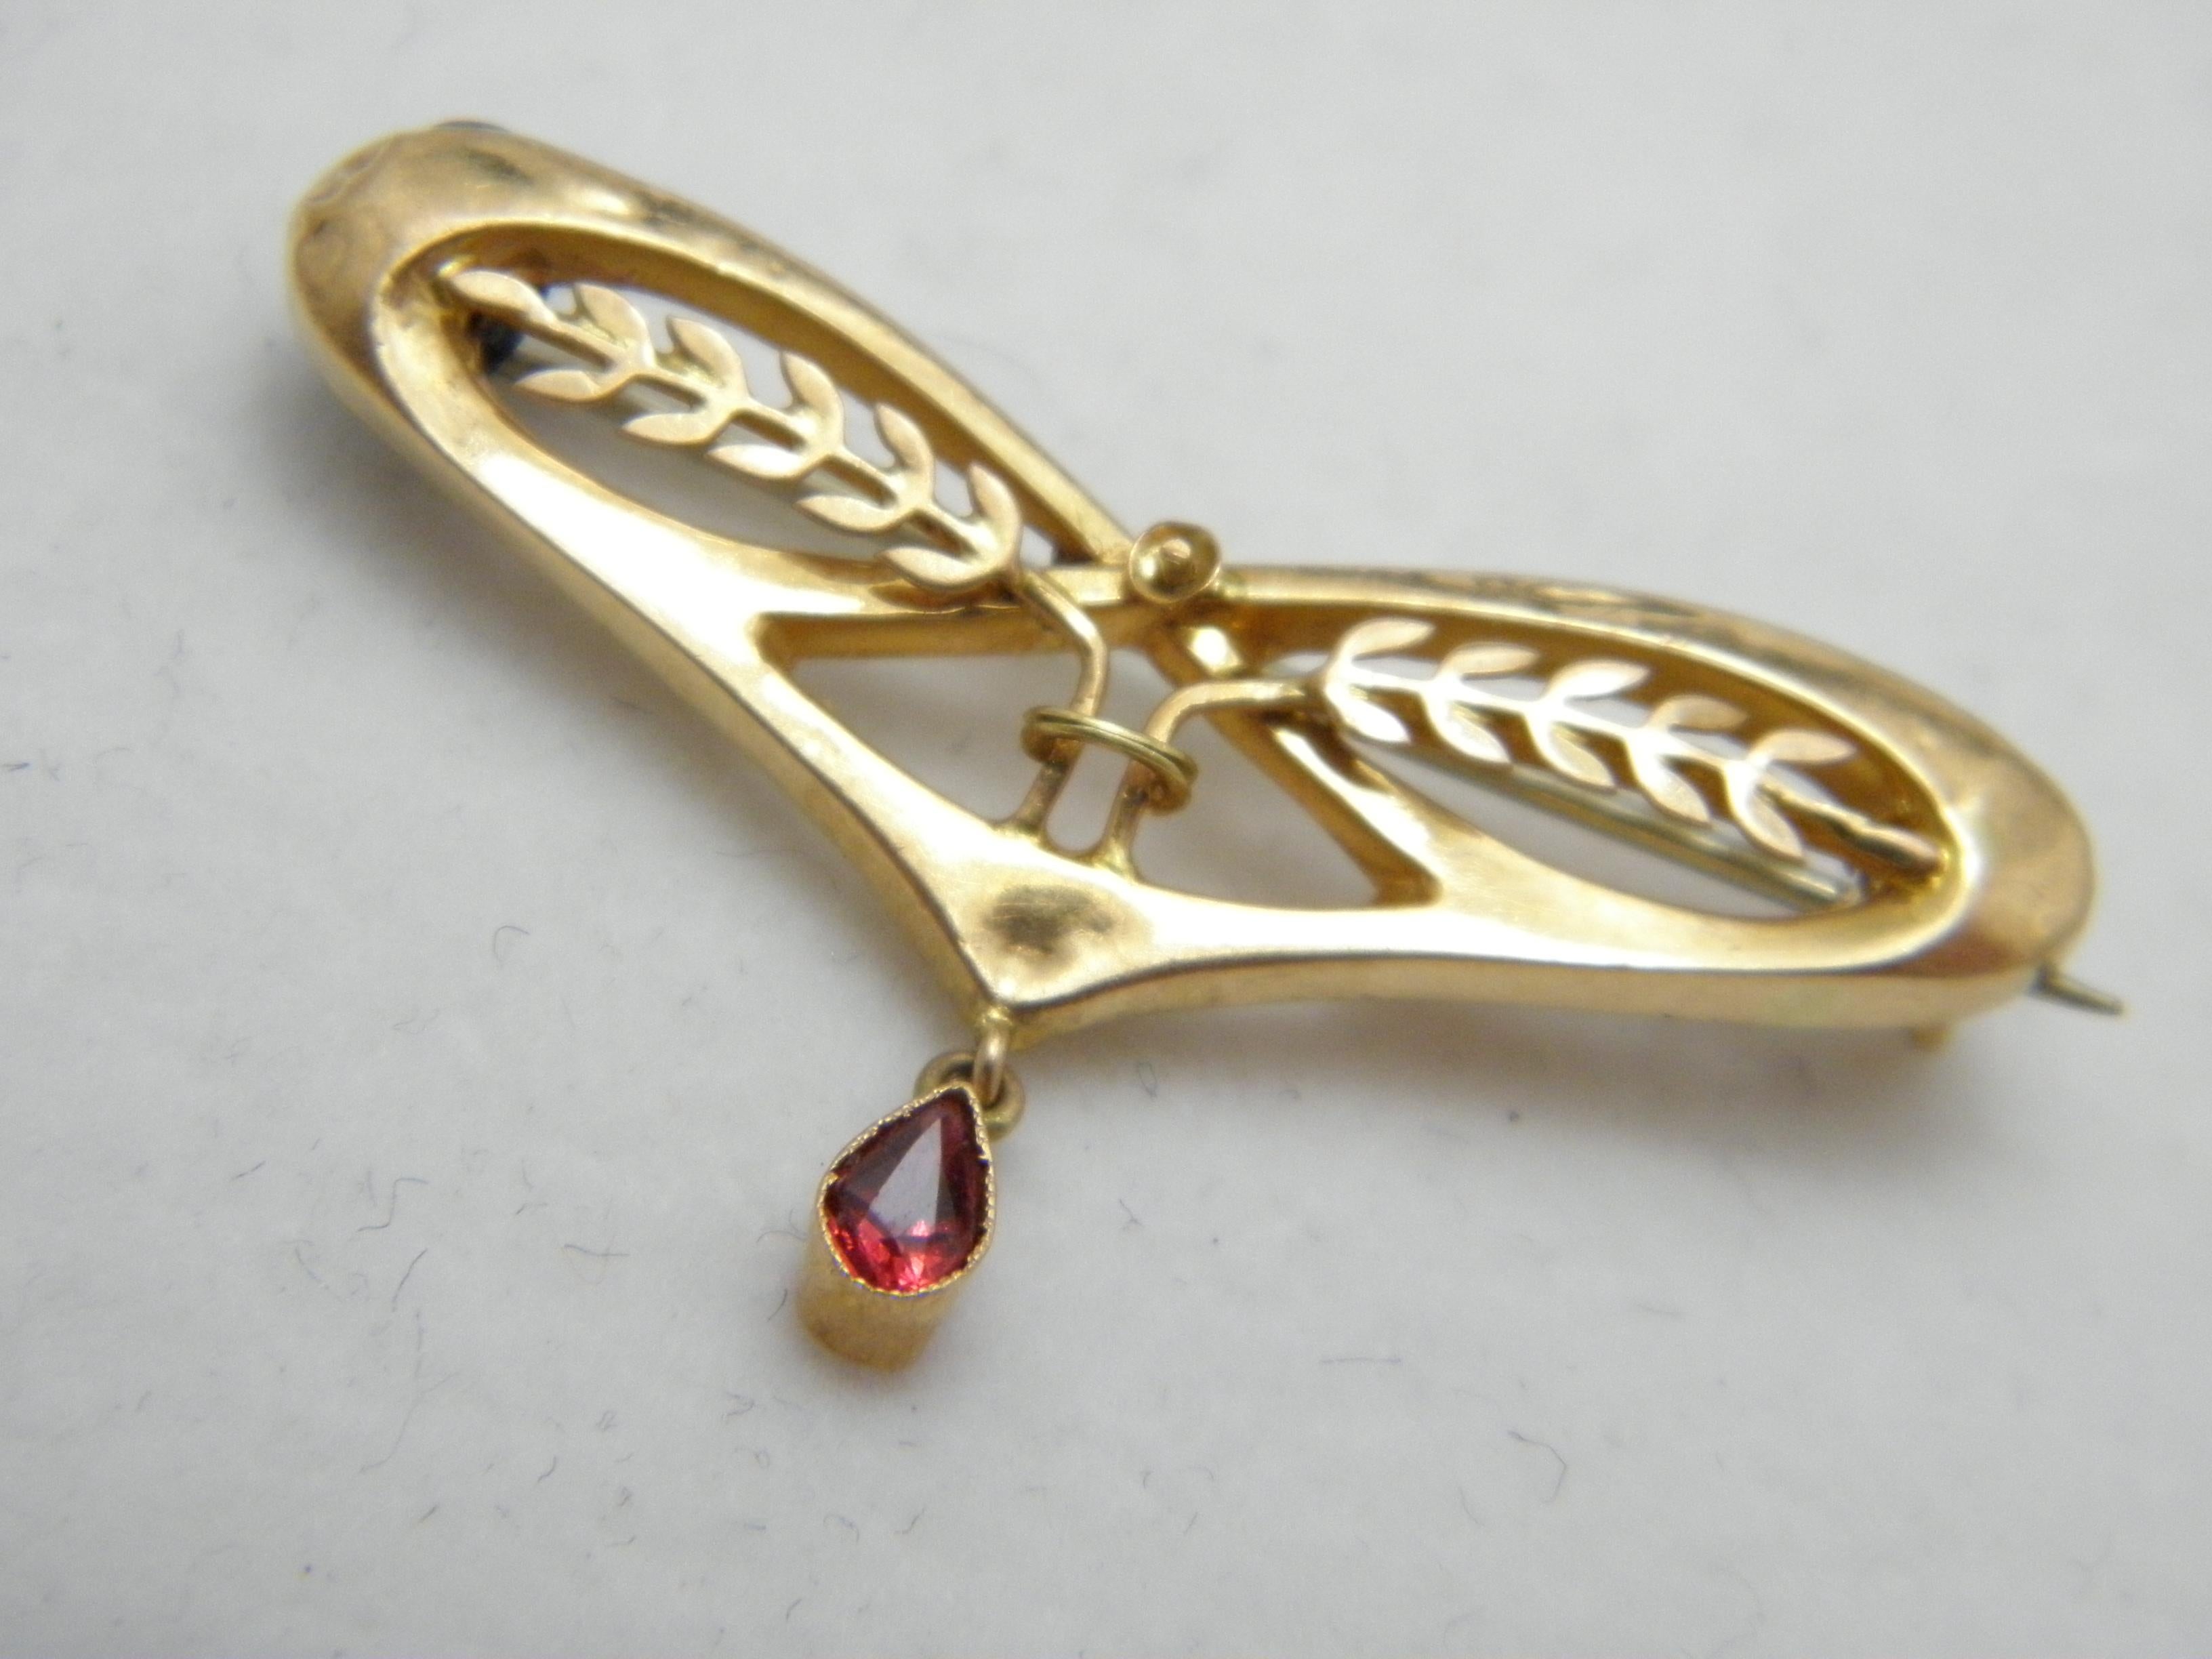 Medieval Bargain Vintage 18ct Gold Ruby Harvest Festival Brooch Pin c1950 750 Purity For Sale